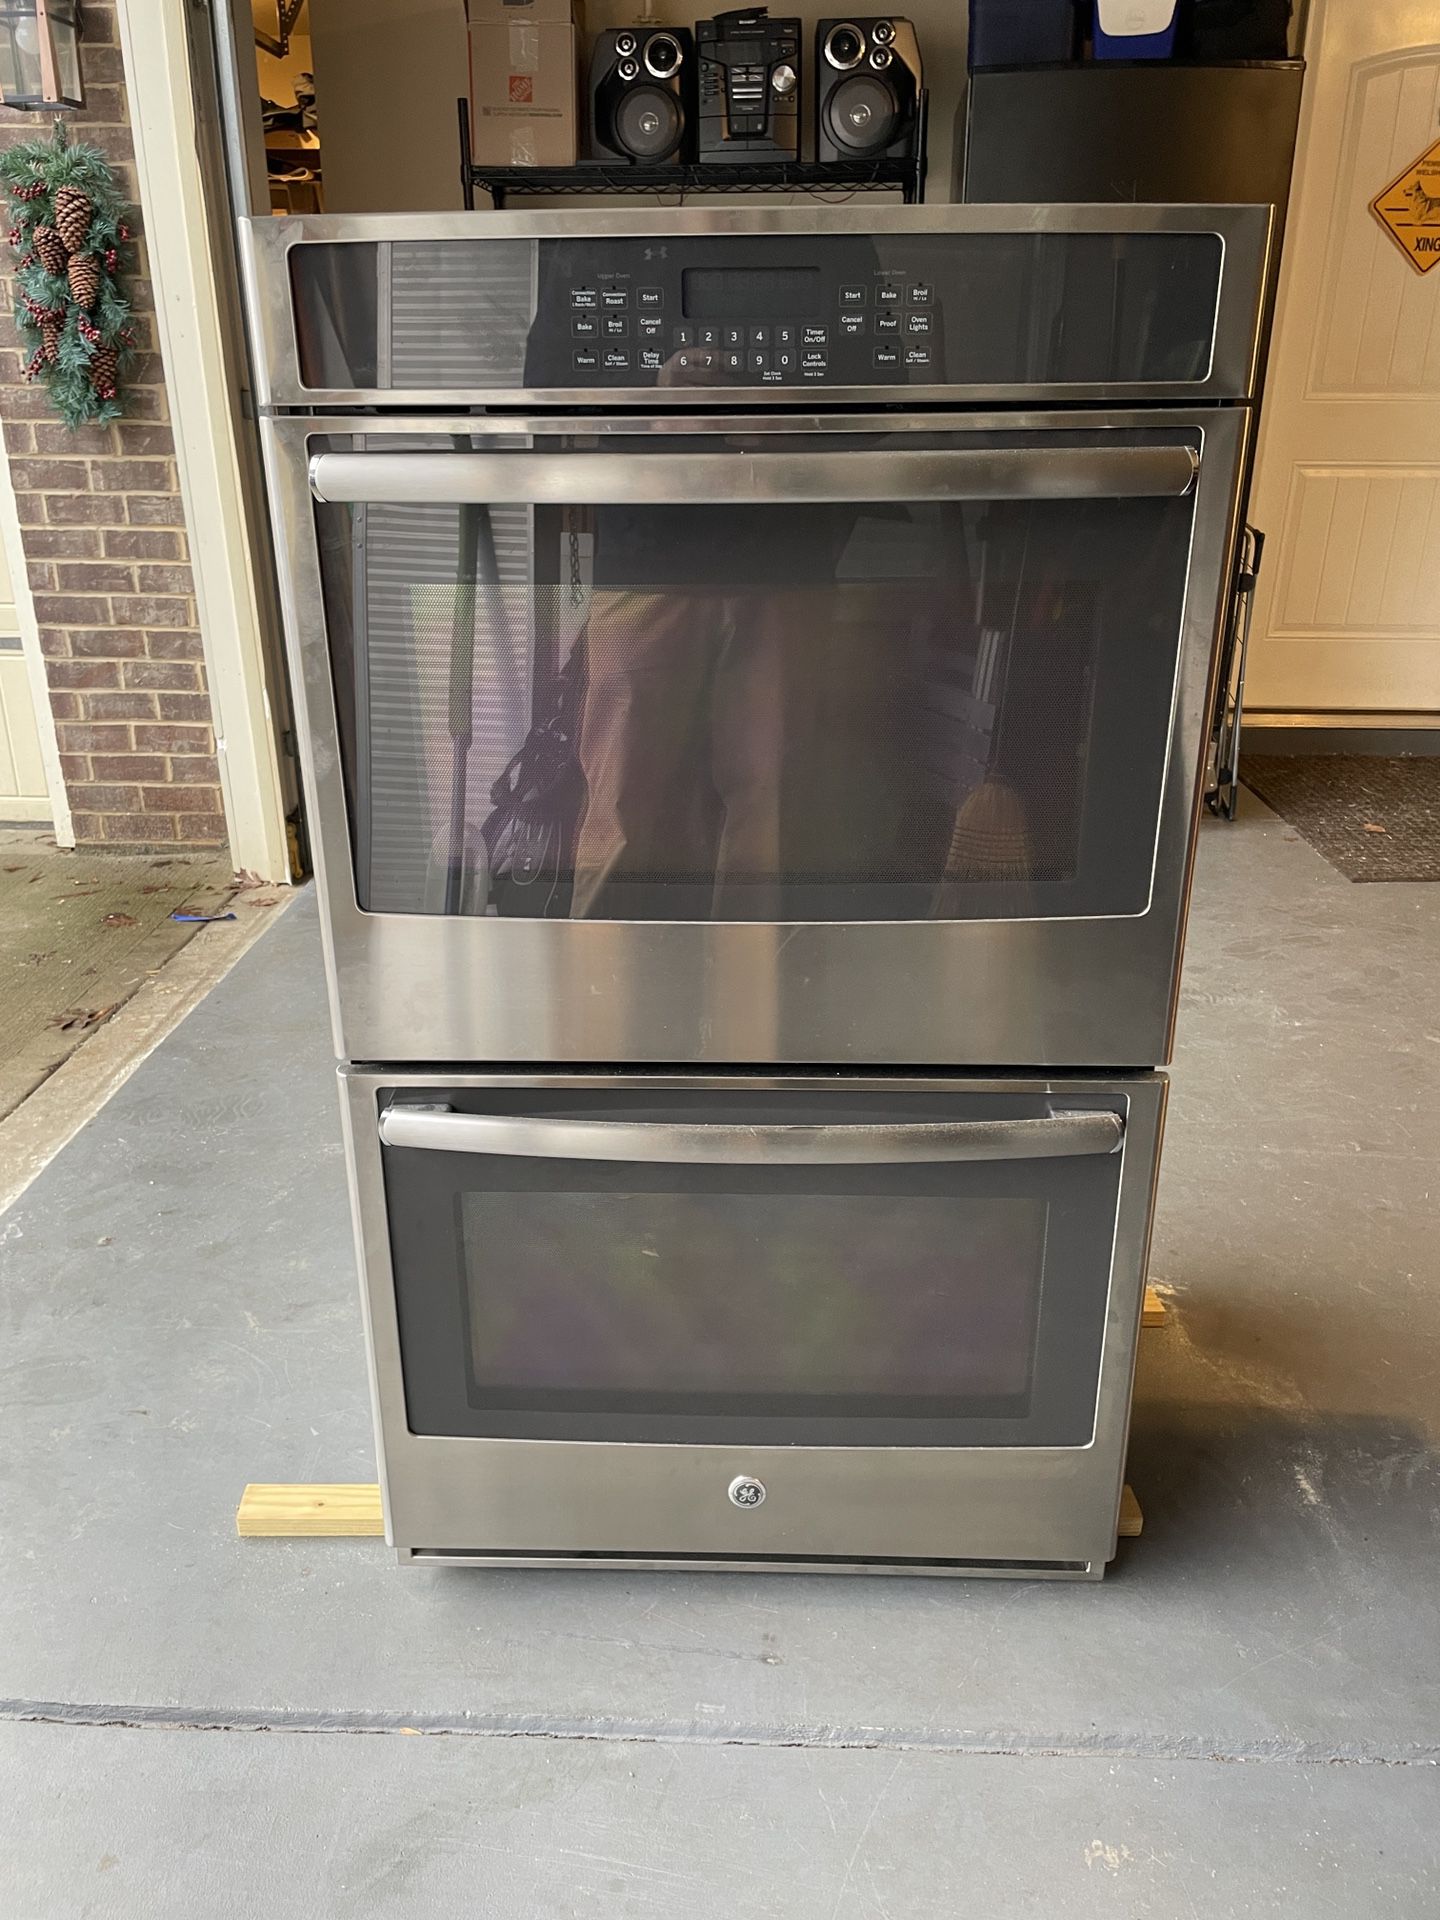 30” GE Stainless Steel Electric Double Oven